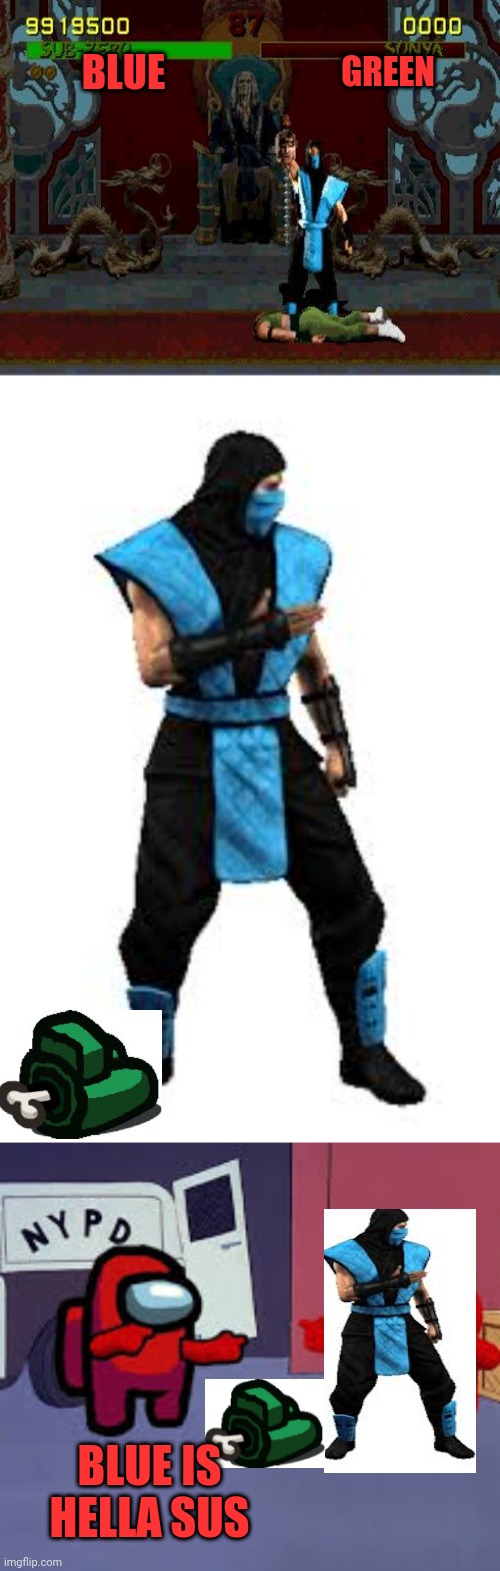 BLUE; GREEN; BLUE IS HELLA SUS | image tagged in sub zero fatality mortal kombat | made w/ Imgflip meme maker